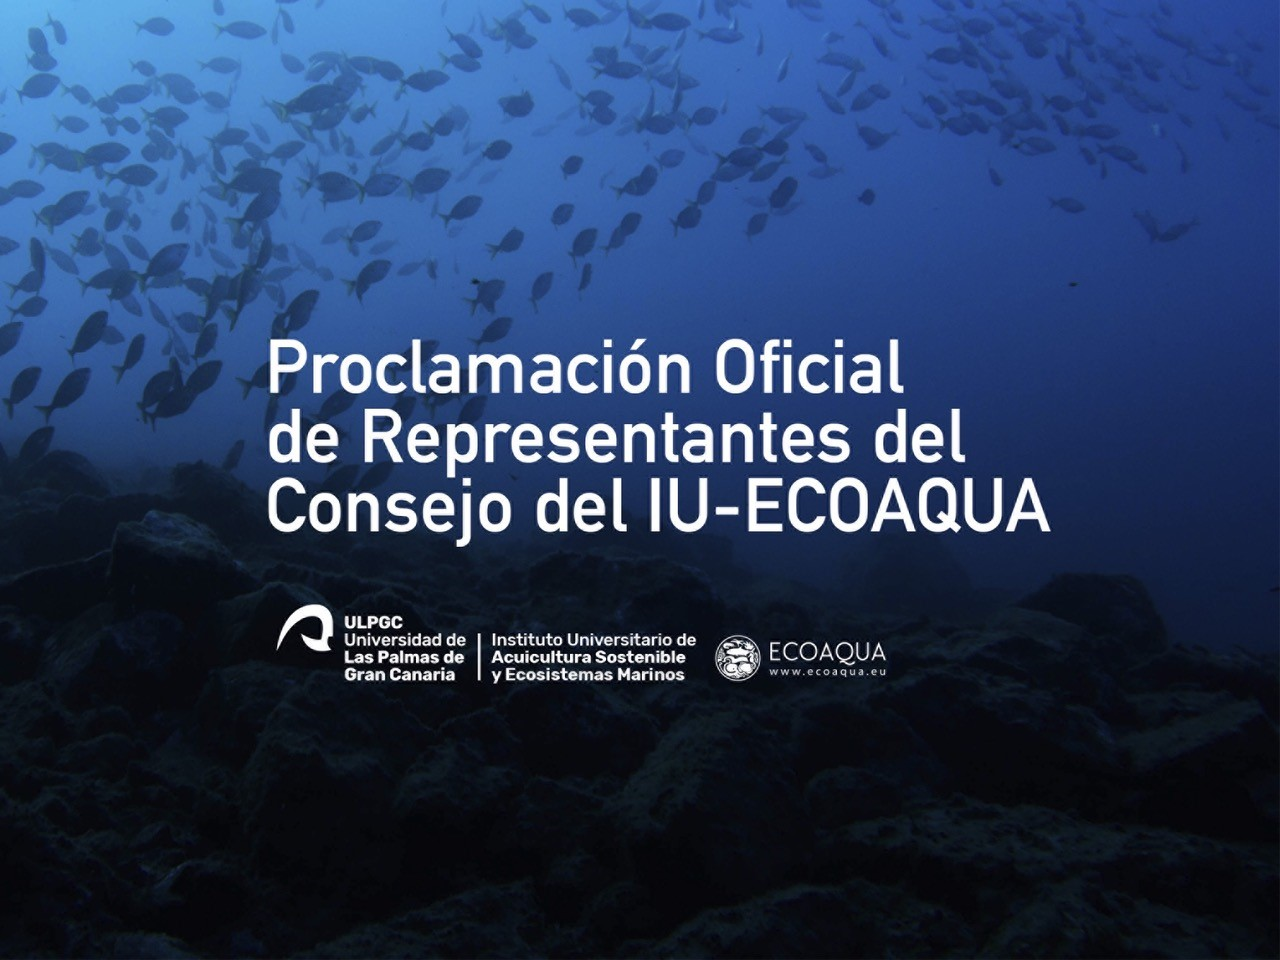 Final proclamation of the elected candidate for Director of the IU-ECOAQUA